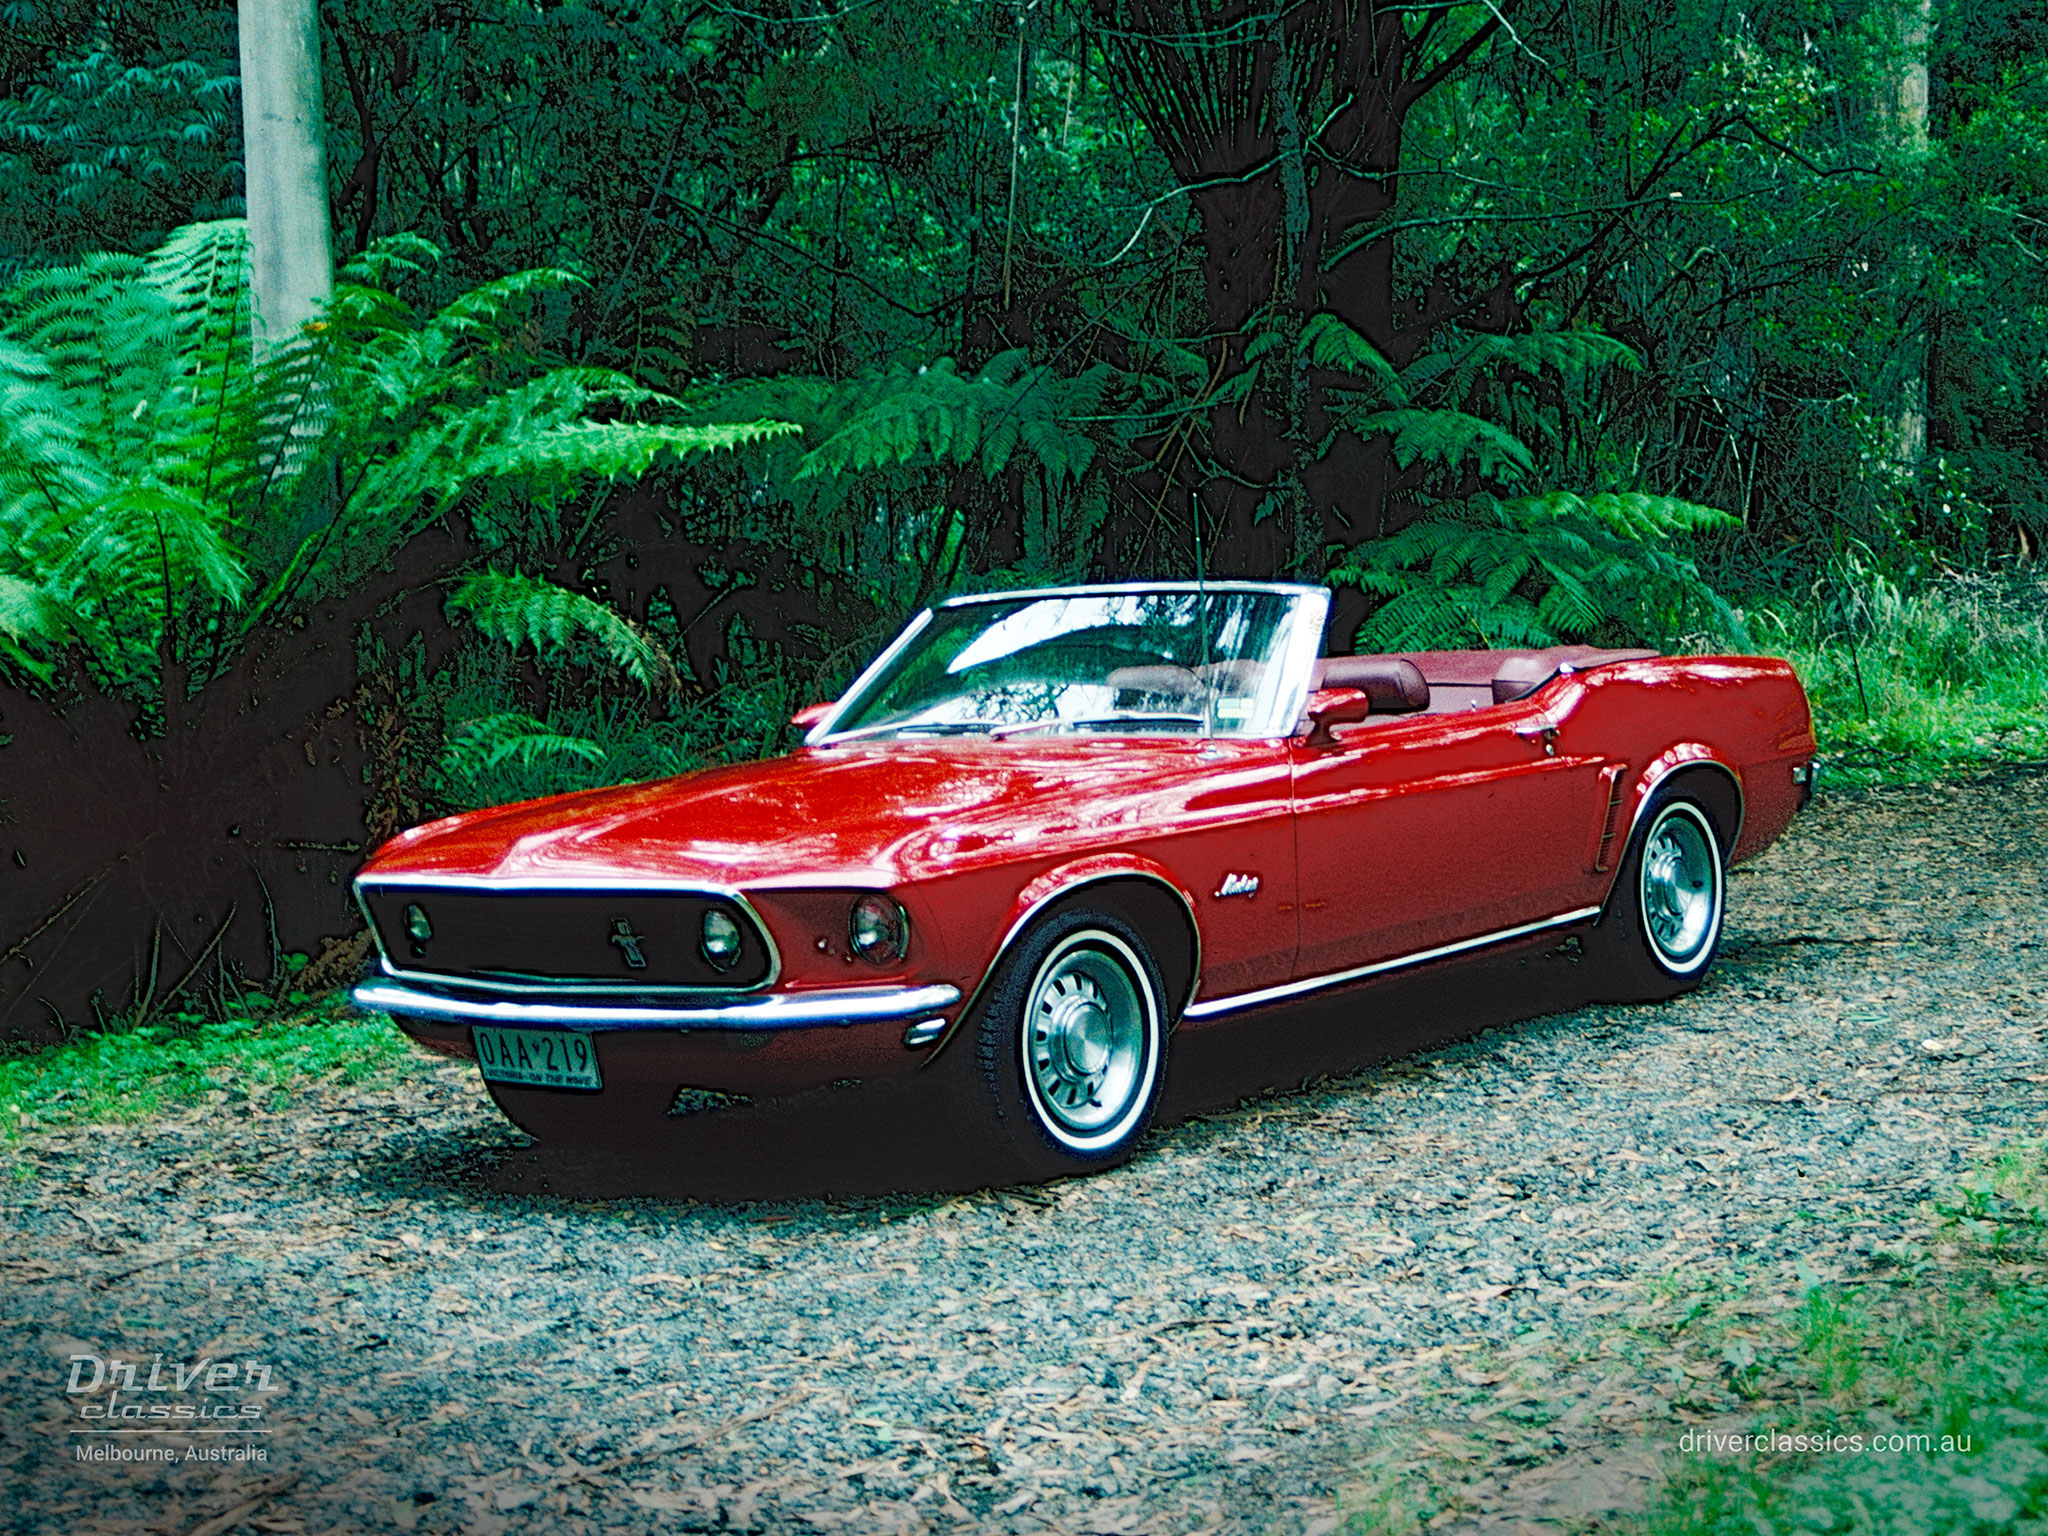 Ford Mustang (1969 model) Convertible, font and left side, Photo taken in the Dandenong Ranges VIC in 1998.